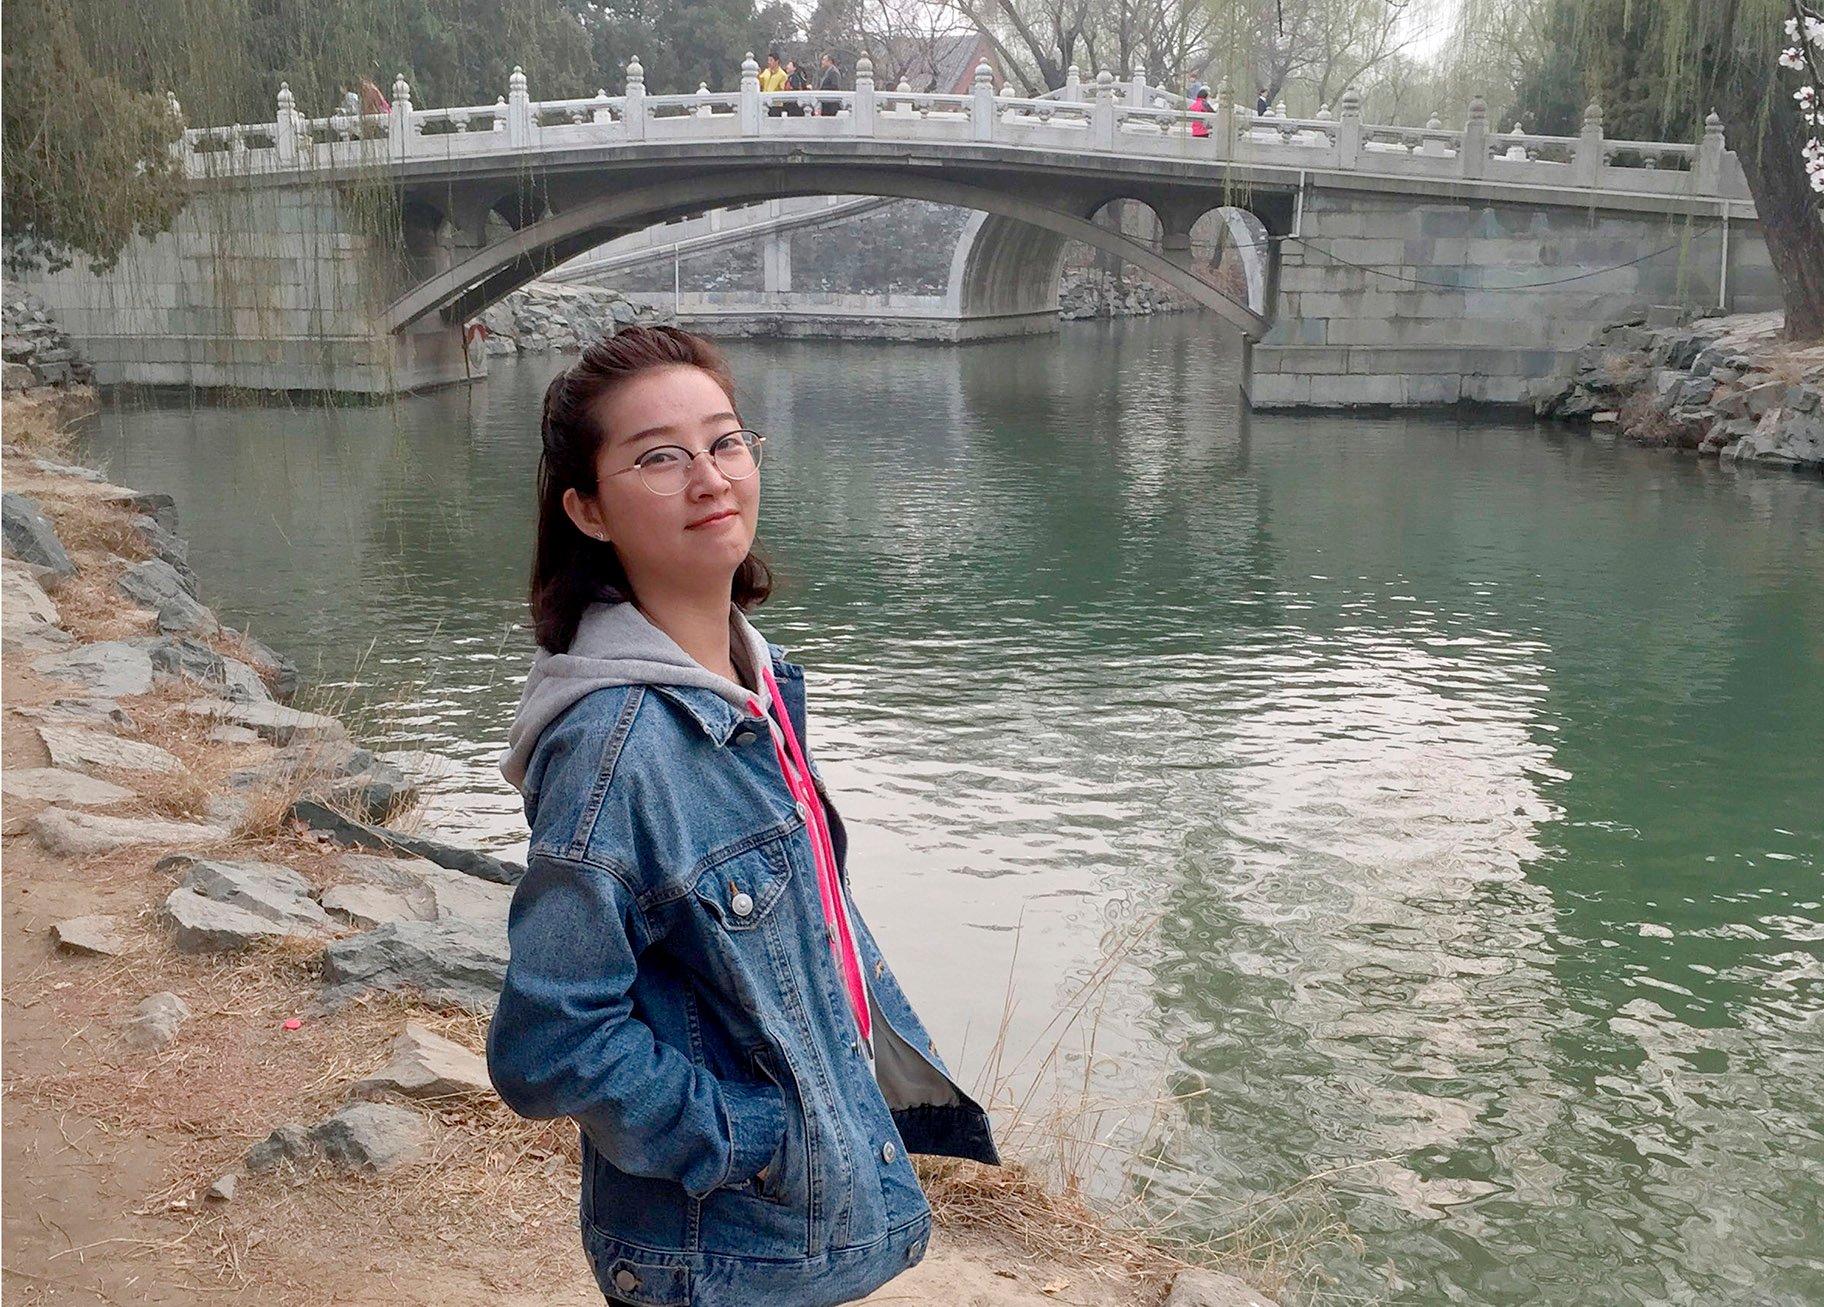 This undated photo shows Yingying Zhang. (Courtesy of the University of Illinois Police Department via AP)